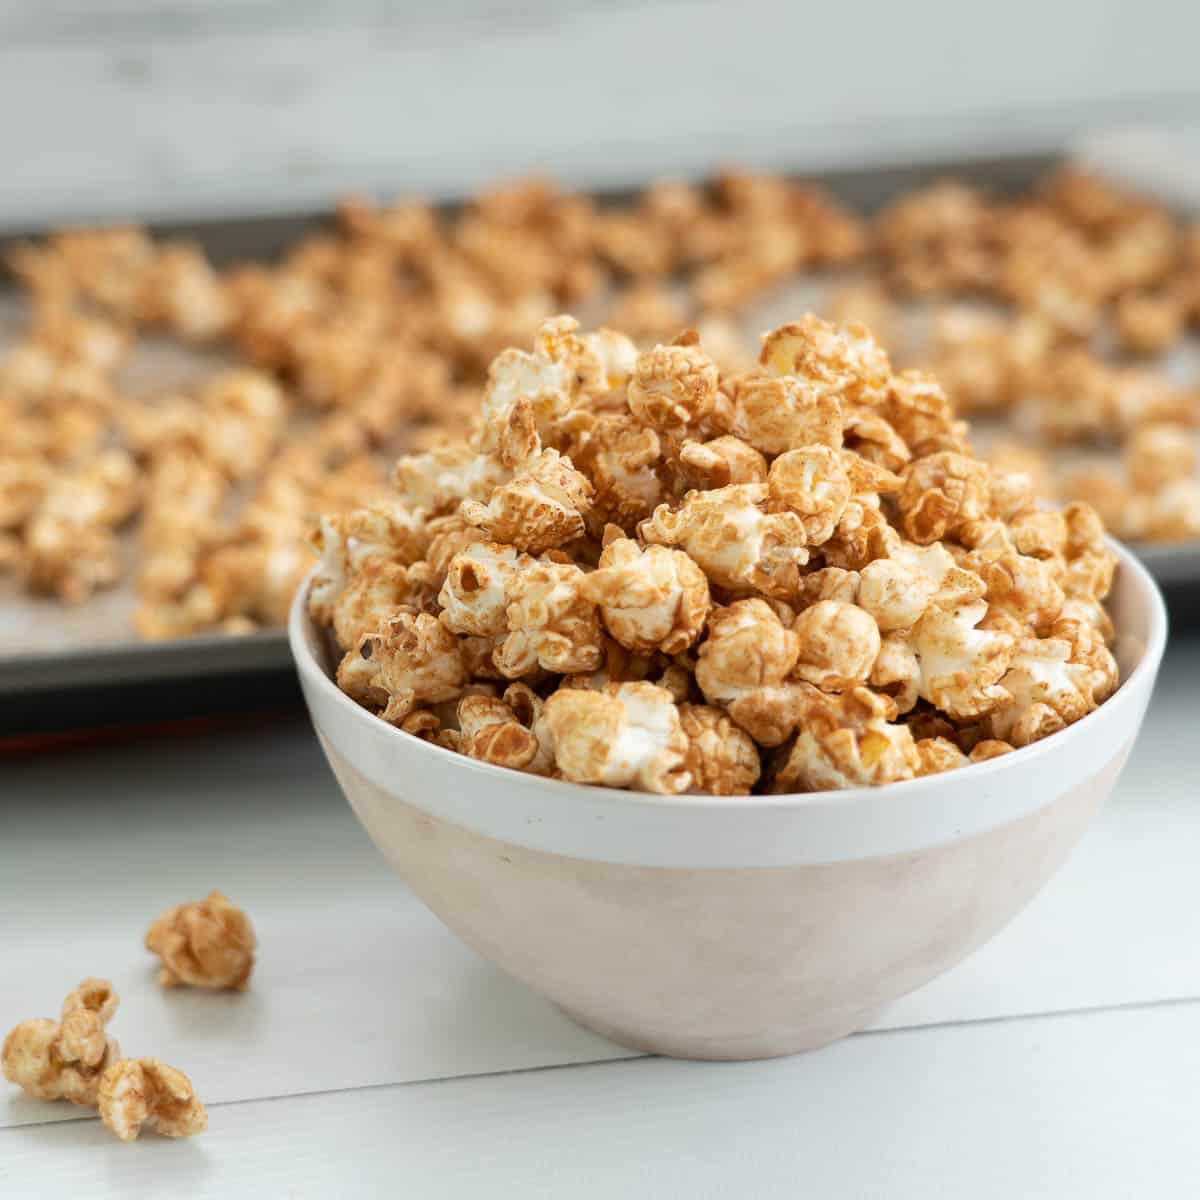 A bowl of cinnamon popcorn sitting in front of a baking tray of cinnamon popcorn.